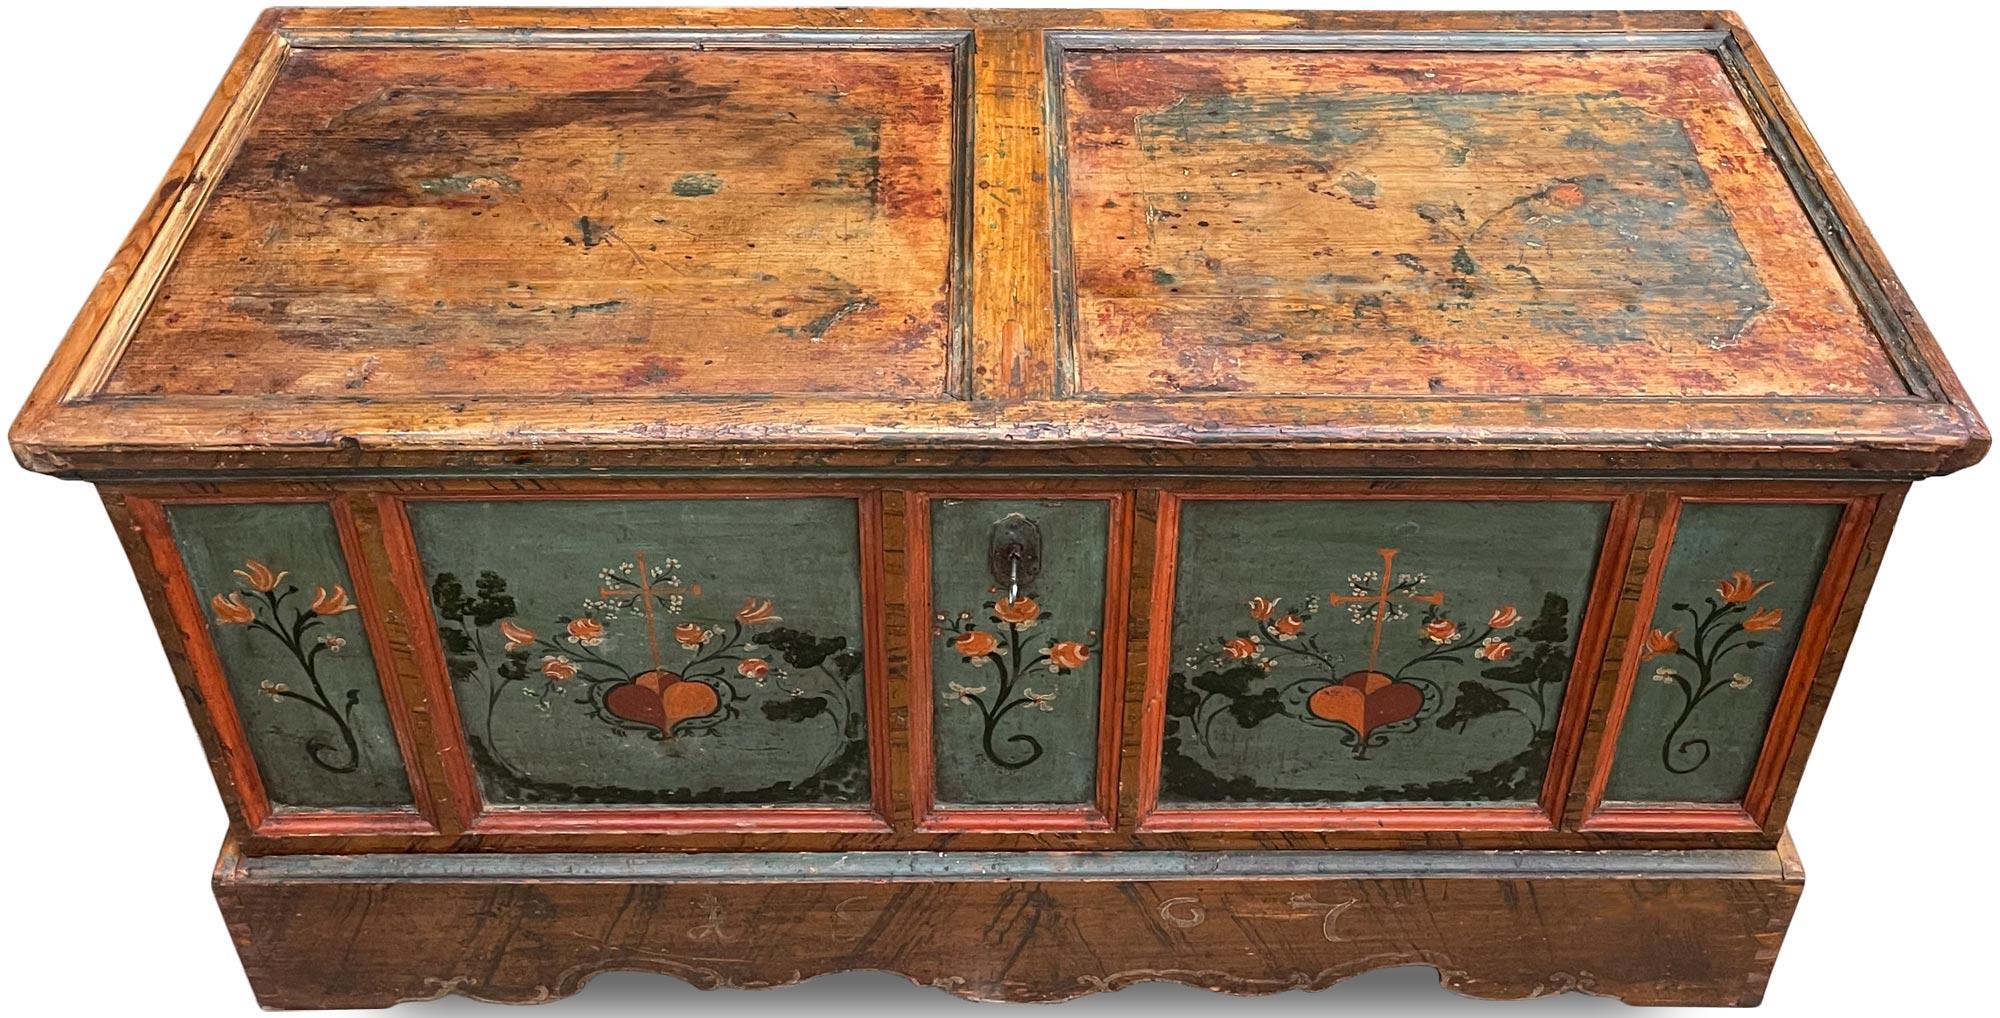 1807 Blu Painted Alpine Central Europe Blanket Chest 5